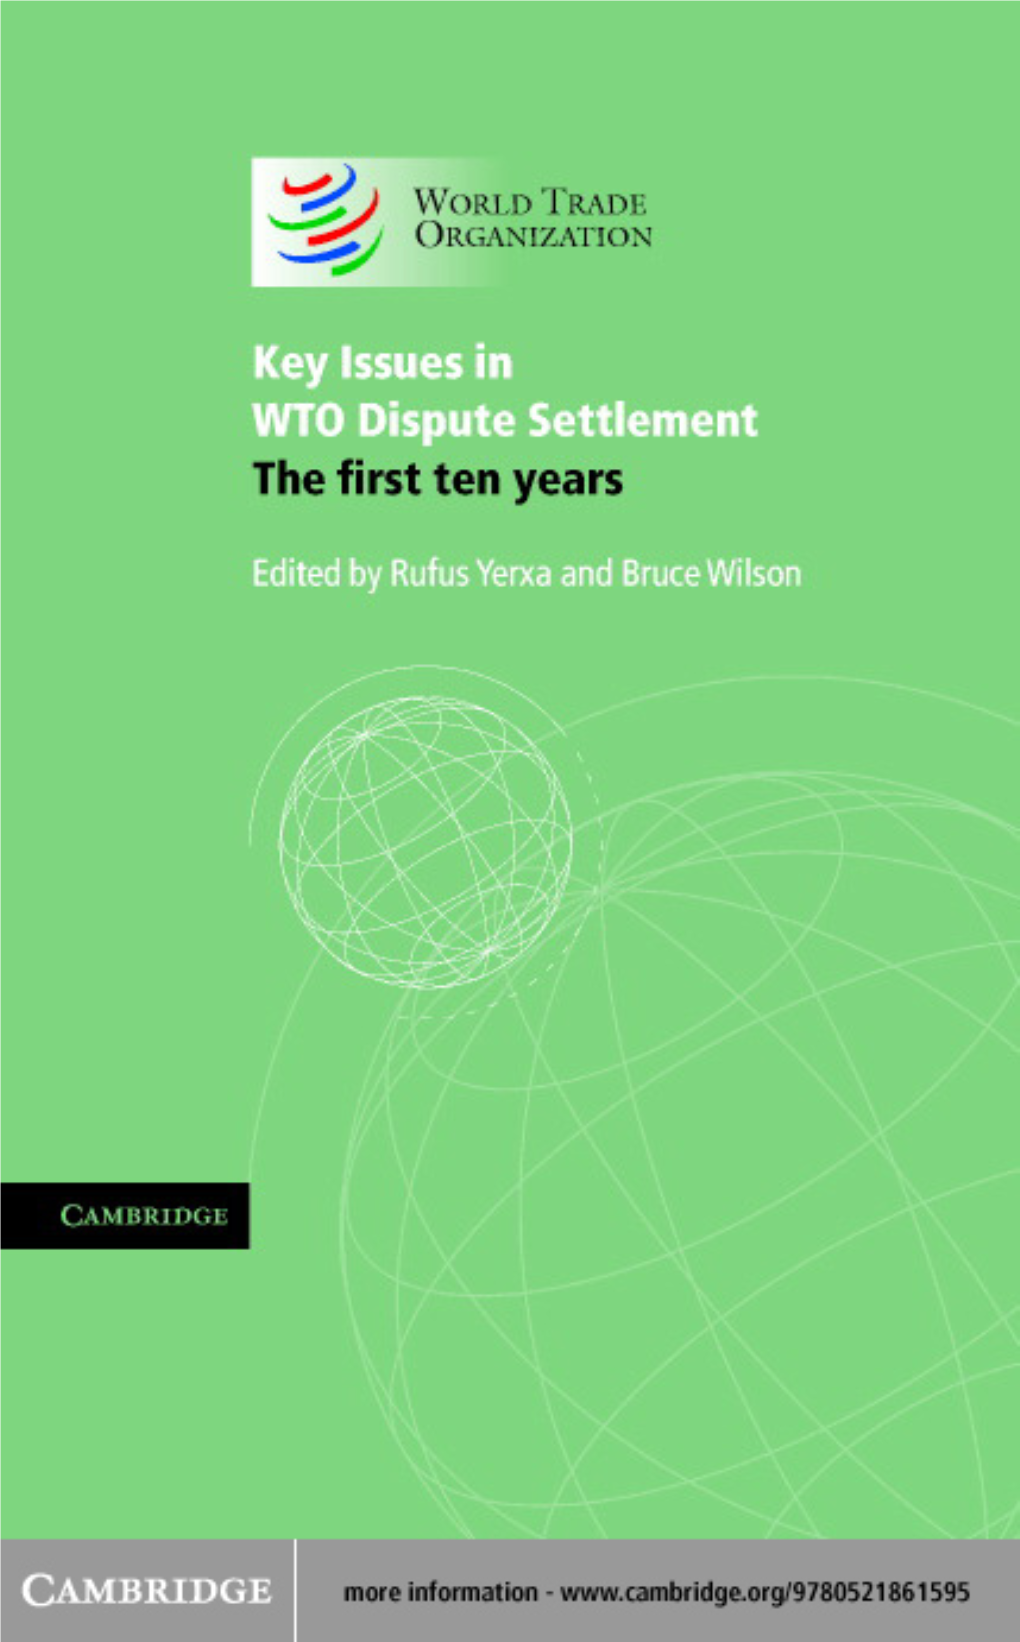 KEY ISSUES in WTO DISPUTE SETTLEMENT the ﬁrst Ten Years